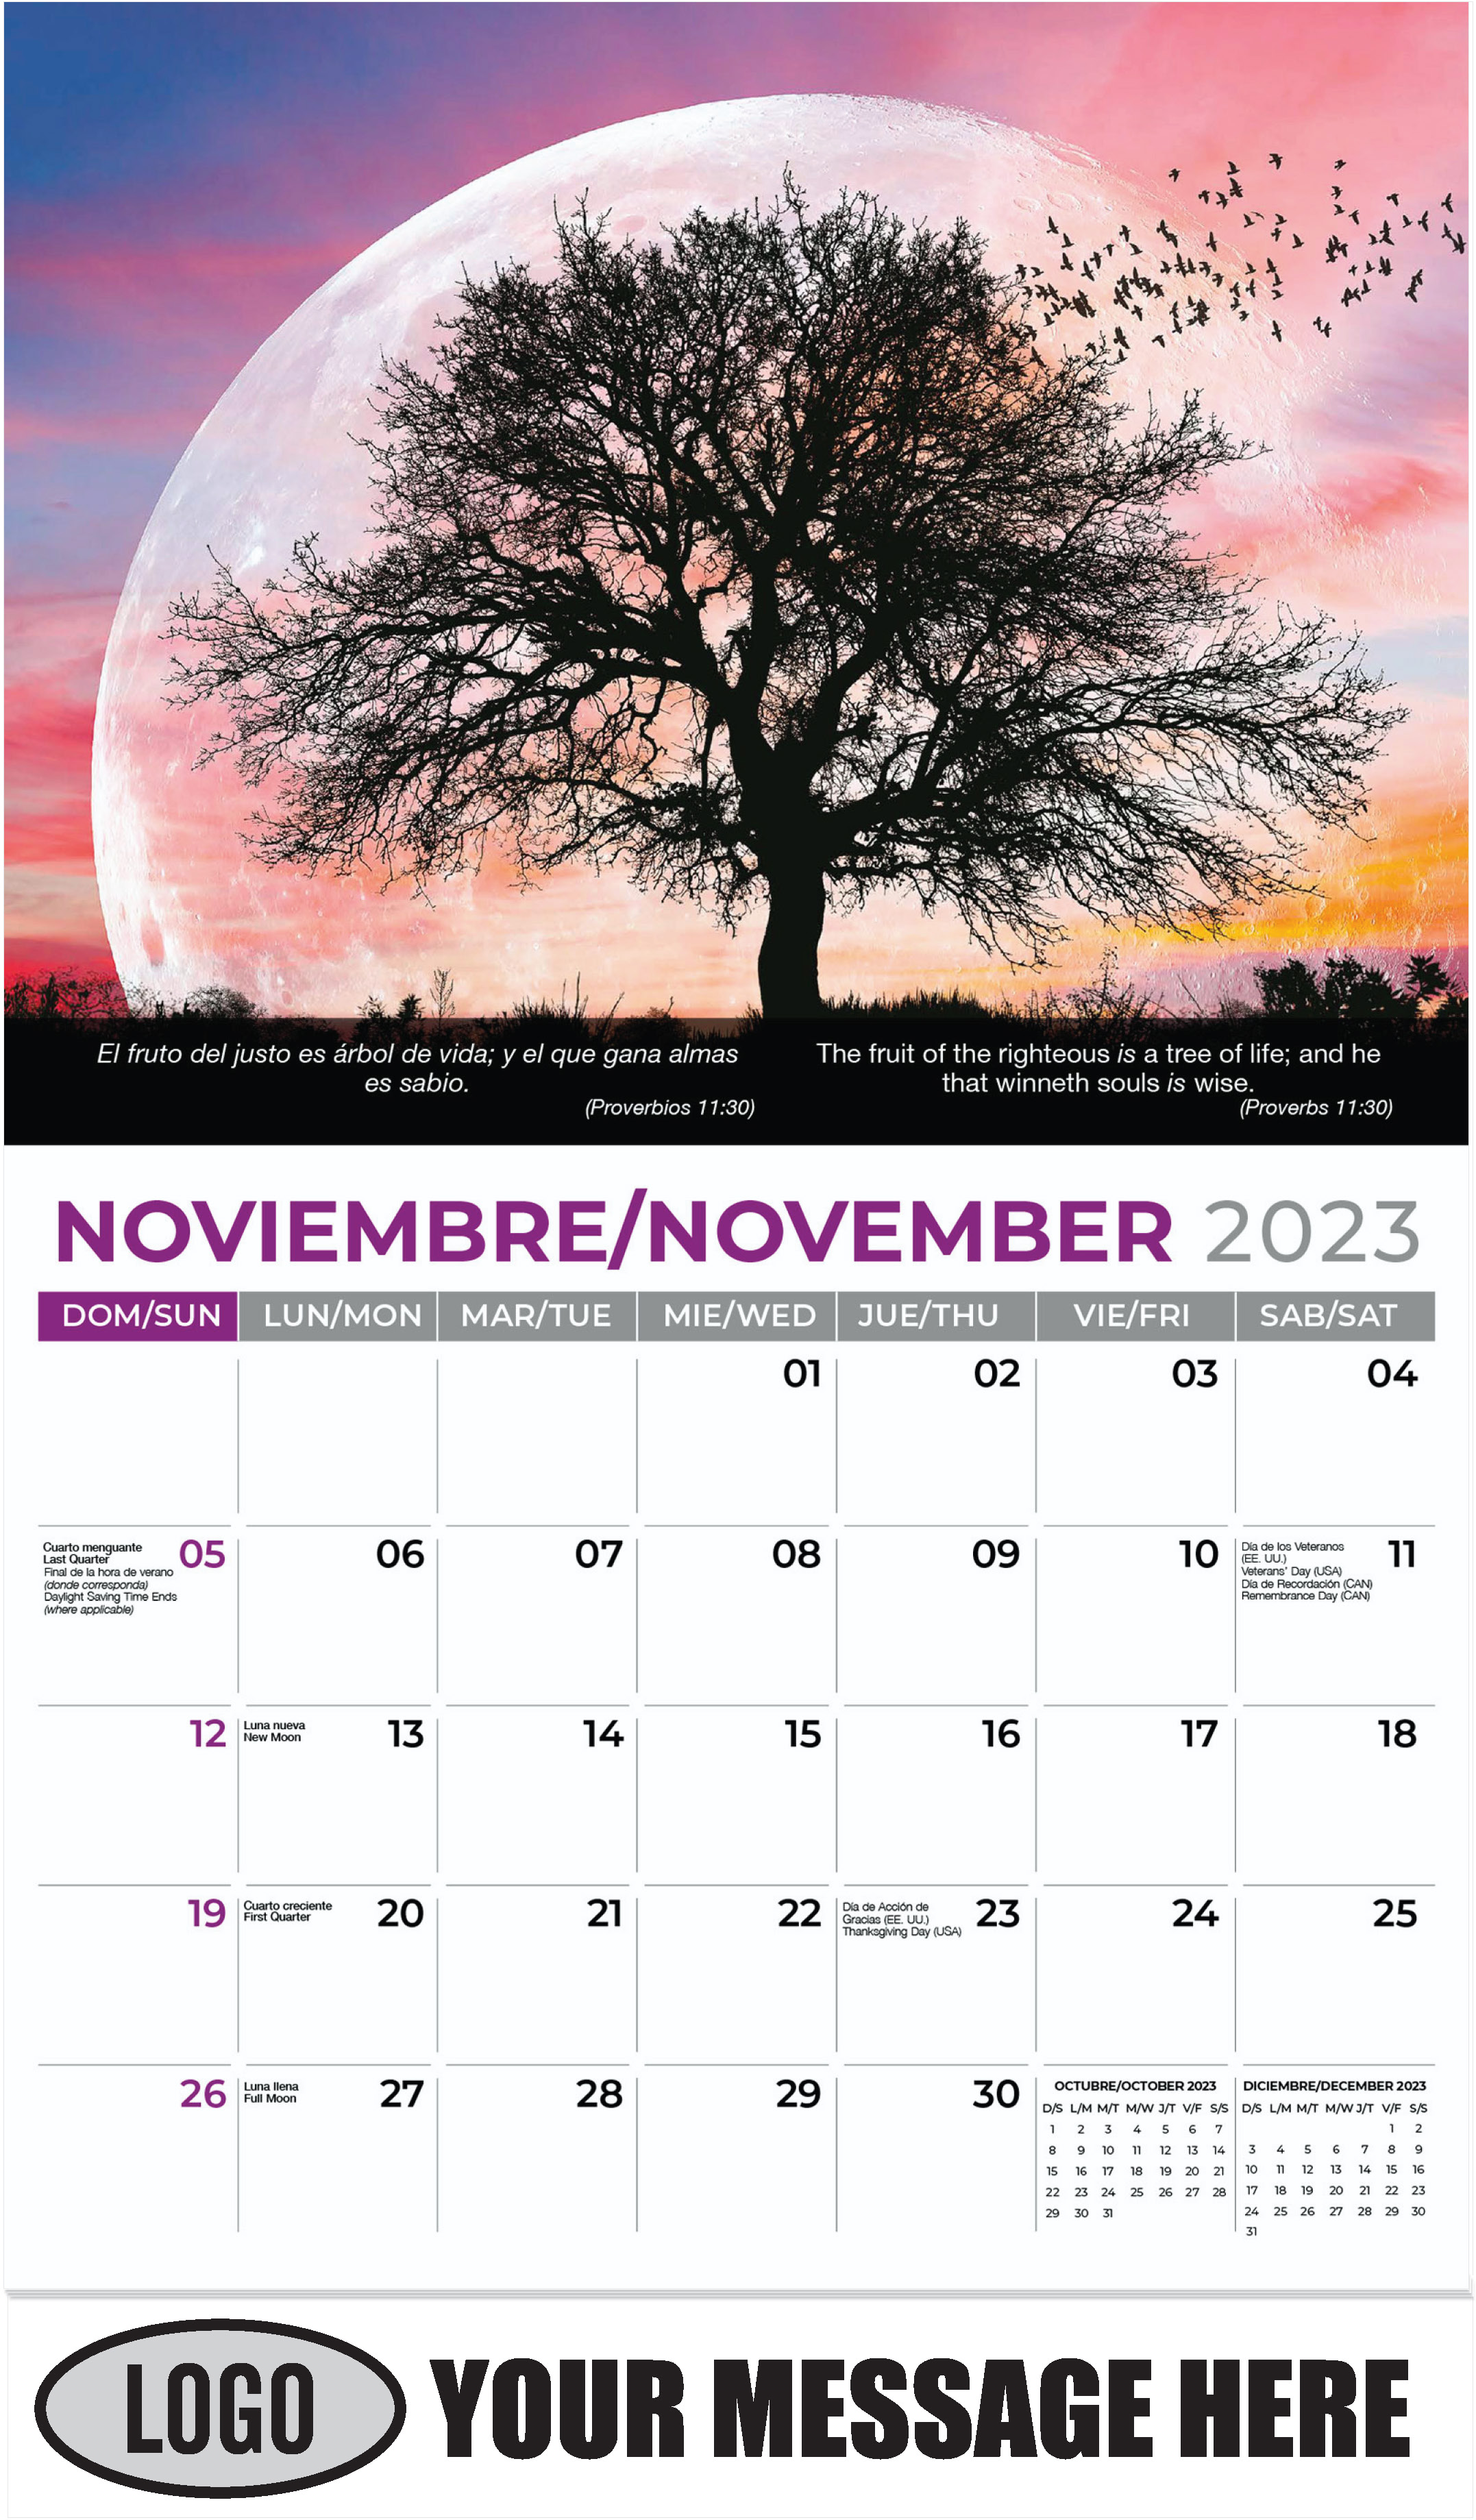 tree with sunset and birds - November - Faith-Passages-Eng-Sp 2023 Promotional Calendar